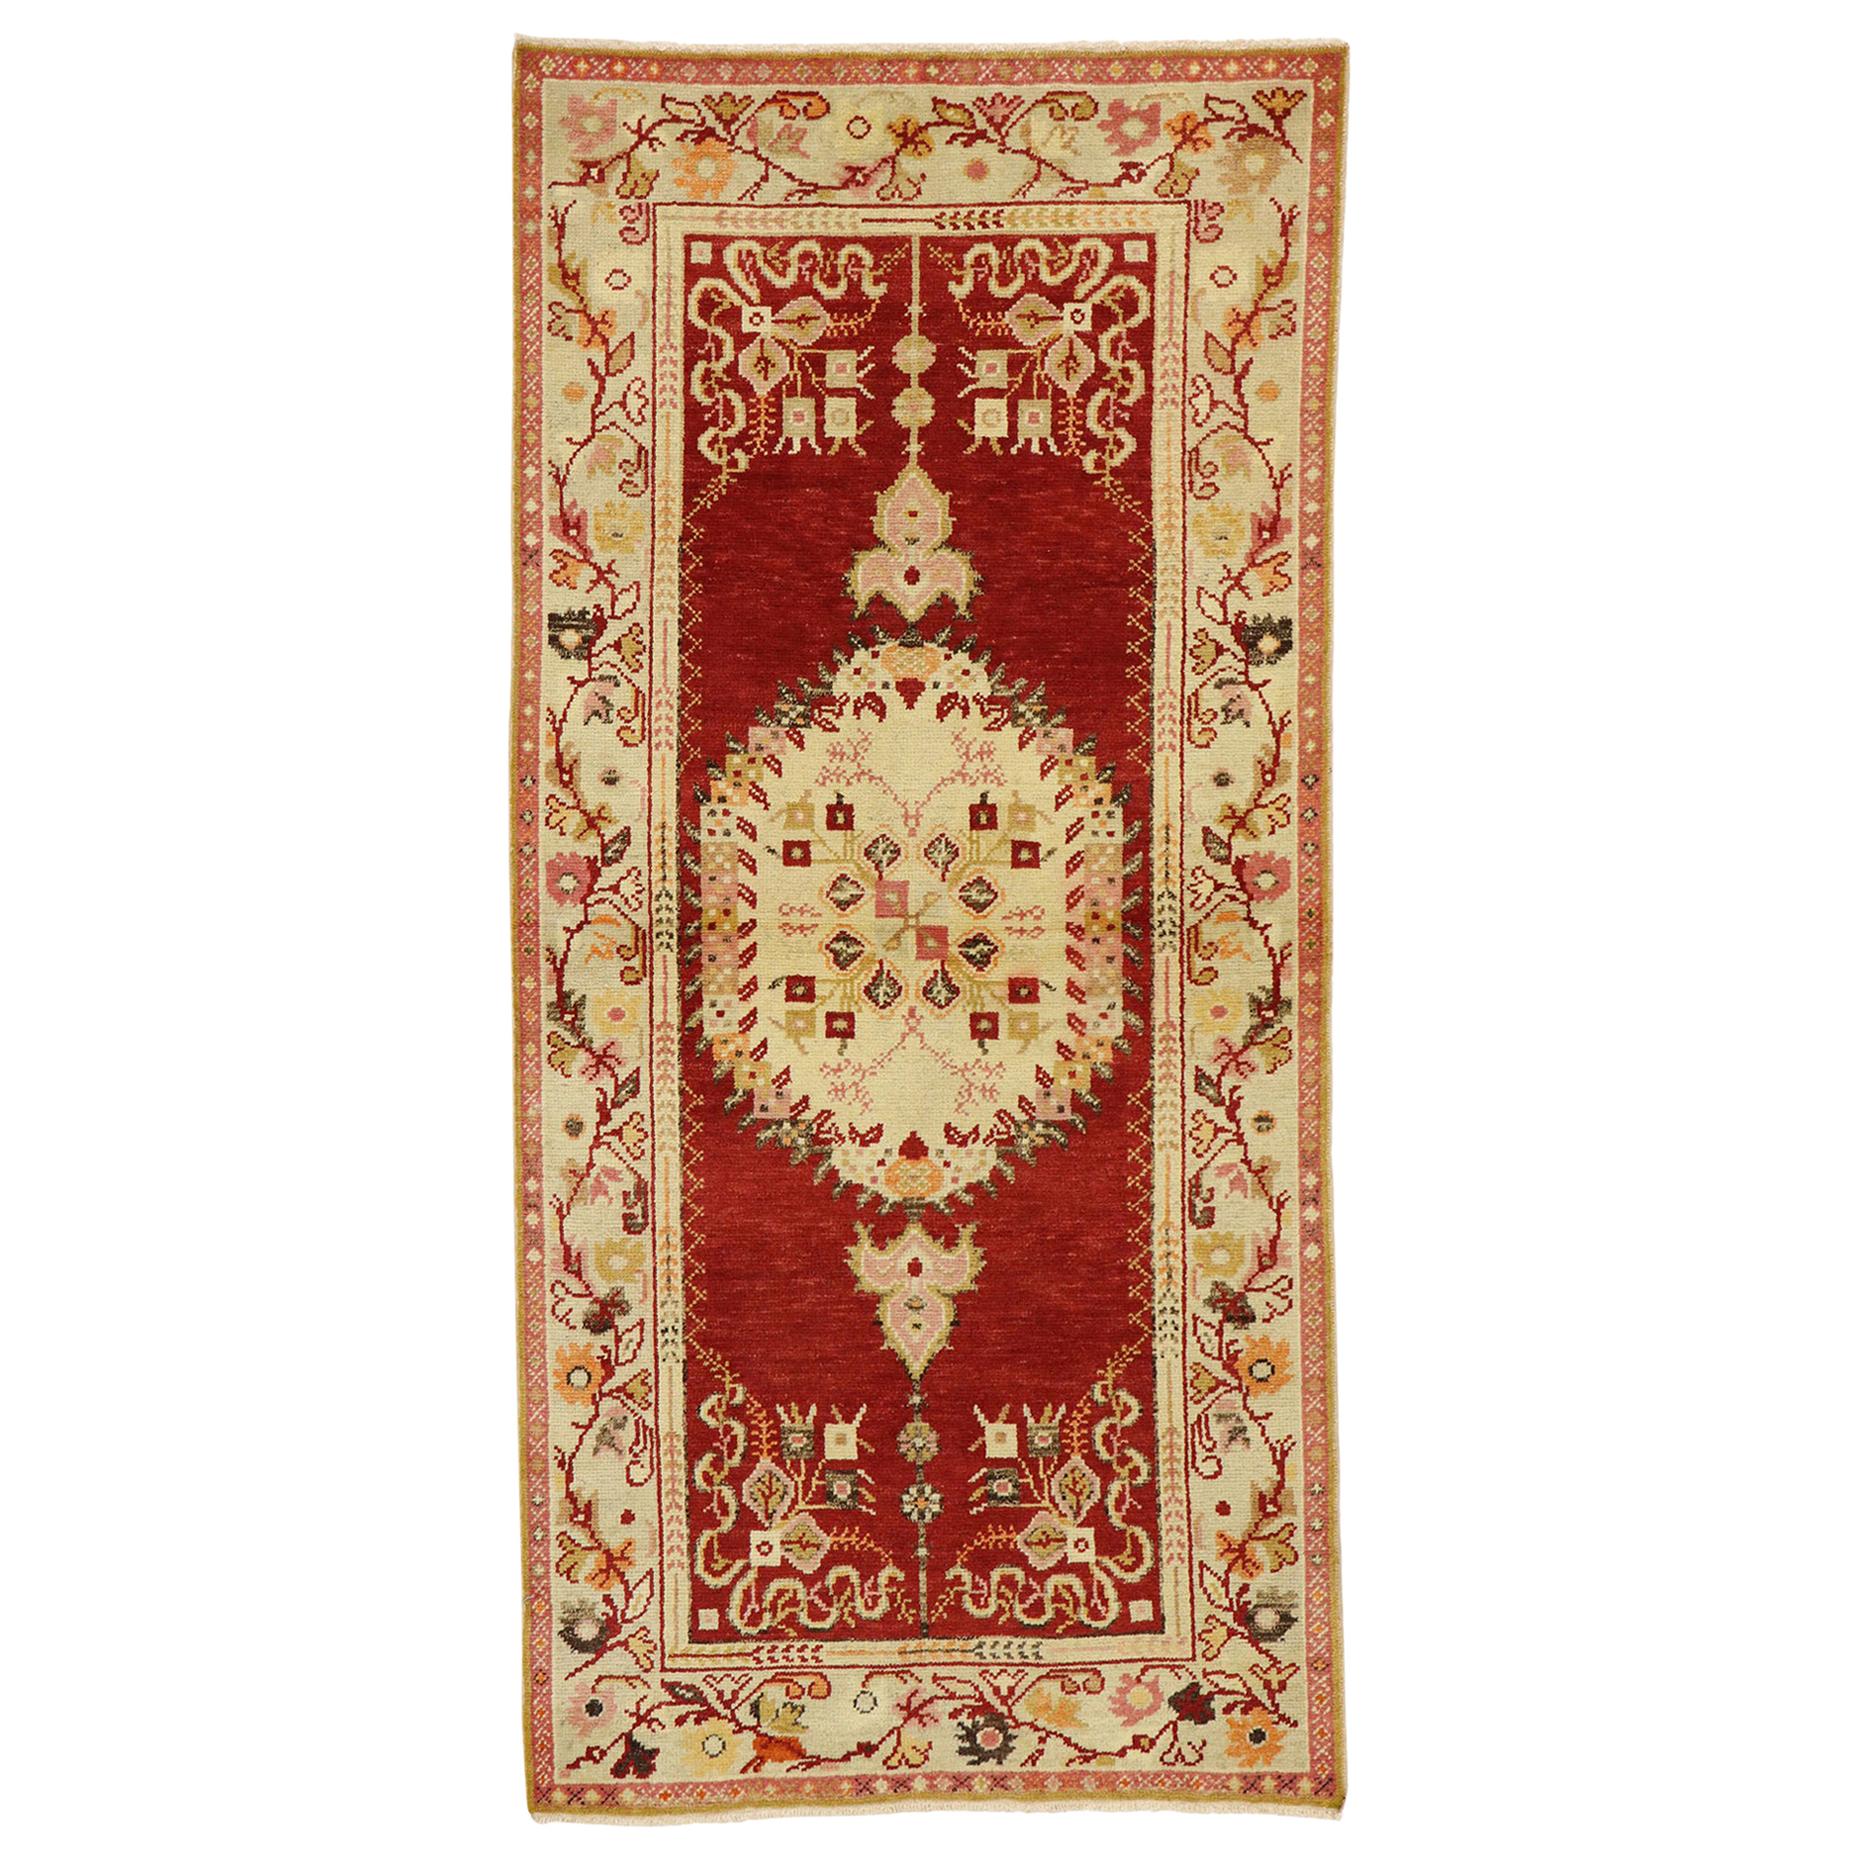 Vintage Turkish Oushak Rug with French Rococo Style, Entry or Foyer Rug